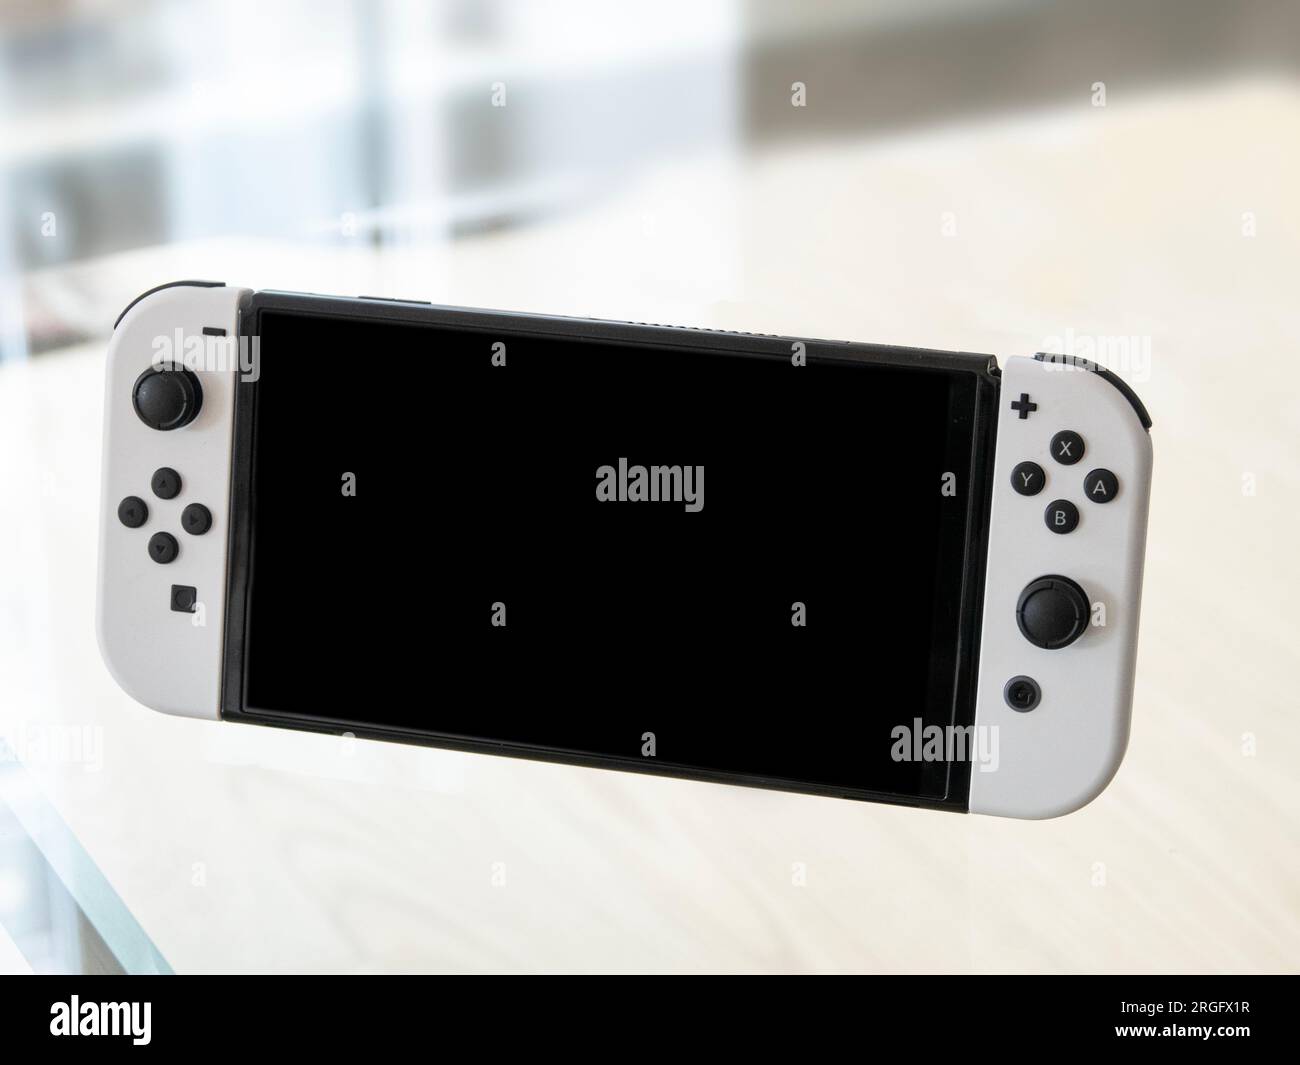 Nintendo Switch – OLED Model in handheld mode. Popular mobile gaming console dispayed on a glass plate. Copenhagen, Denmark - August 9, 2023. Stock Photo